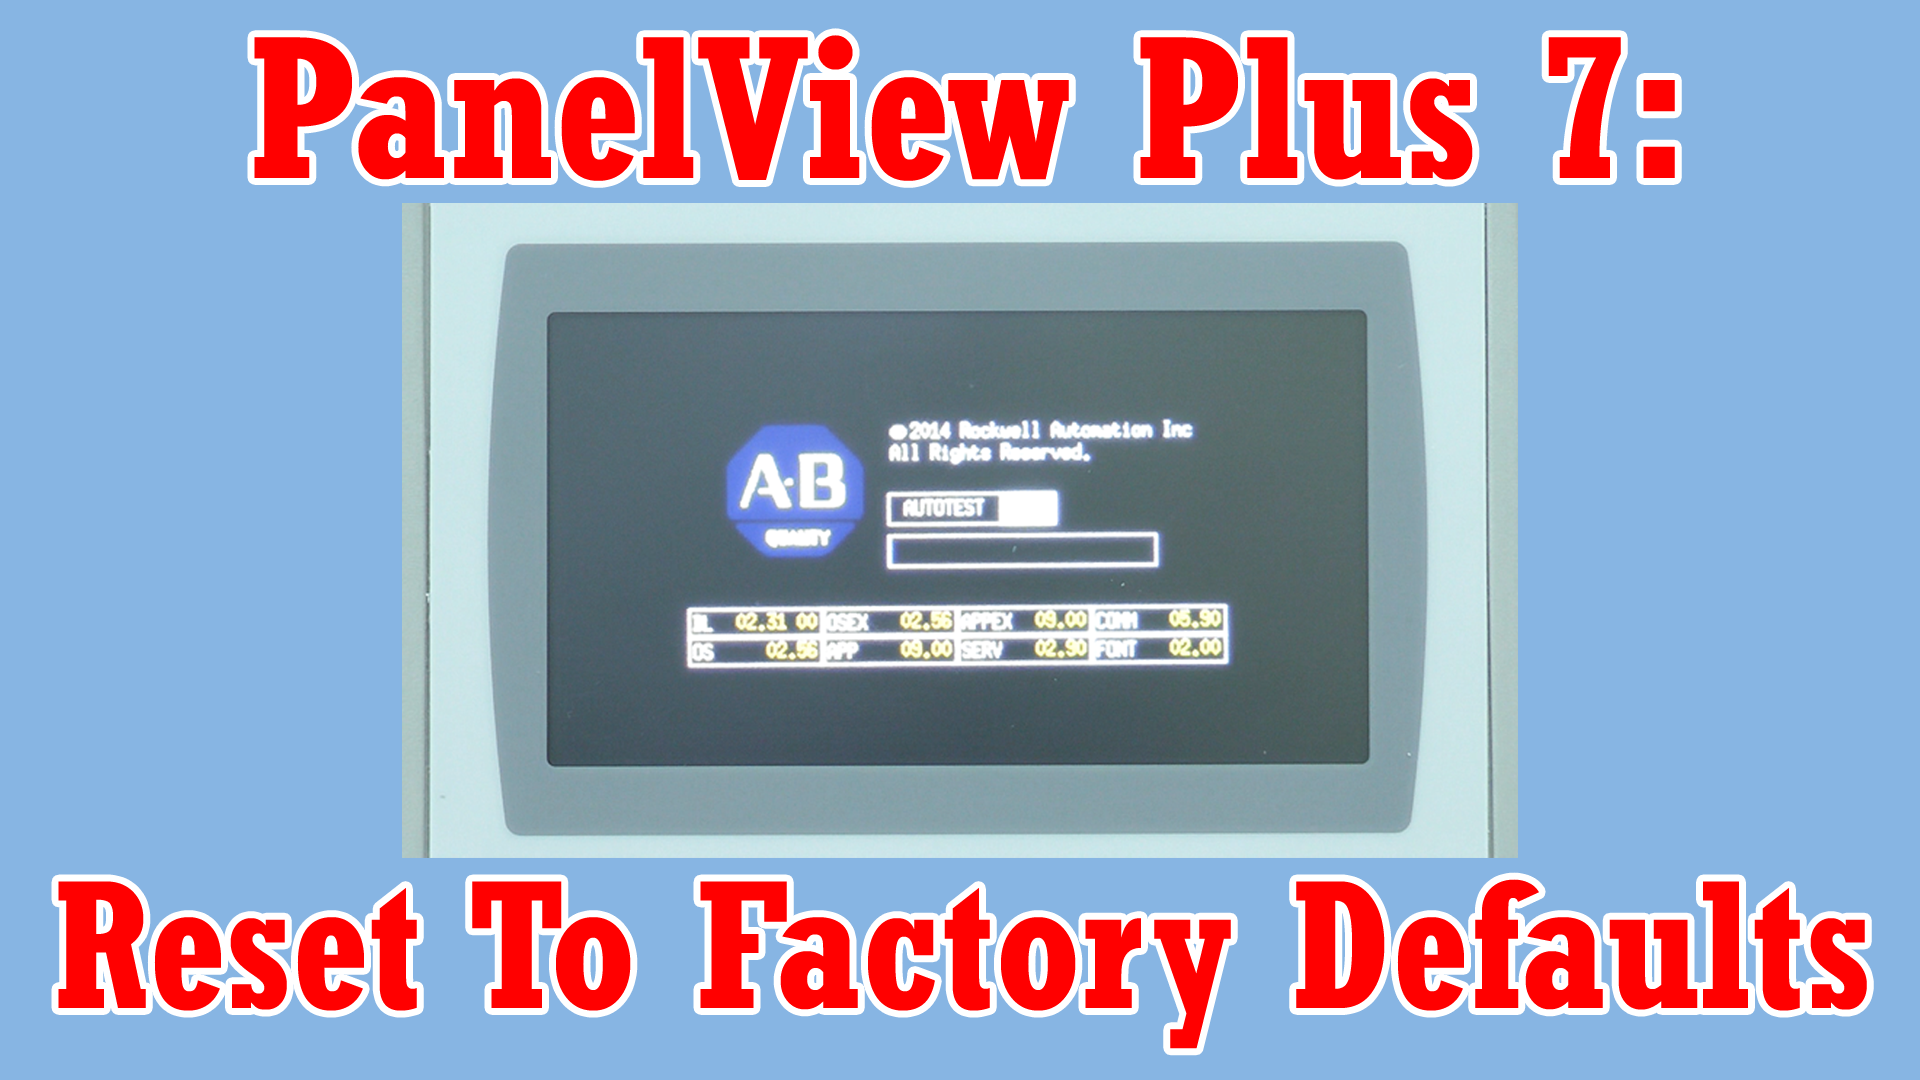 PanelView Plus 7 - Reset to Factory Defaults (M4E38)